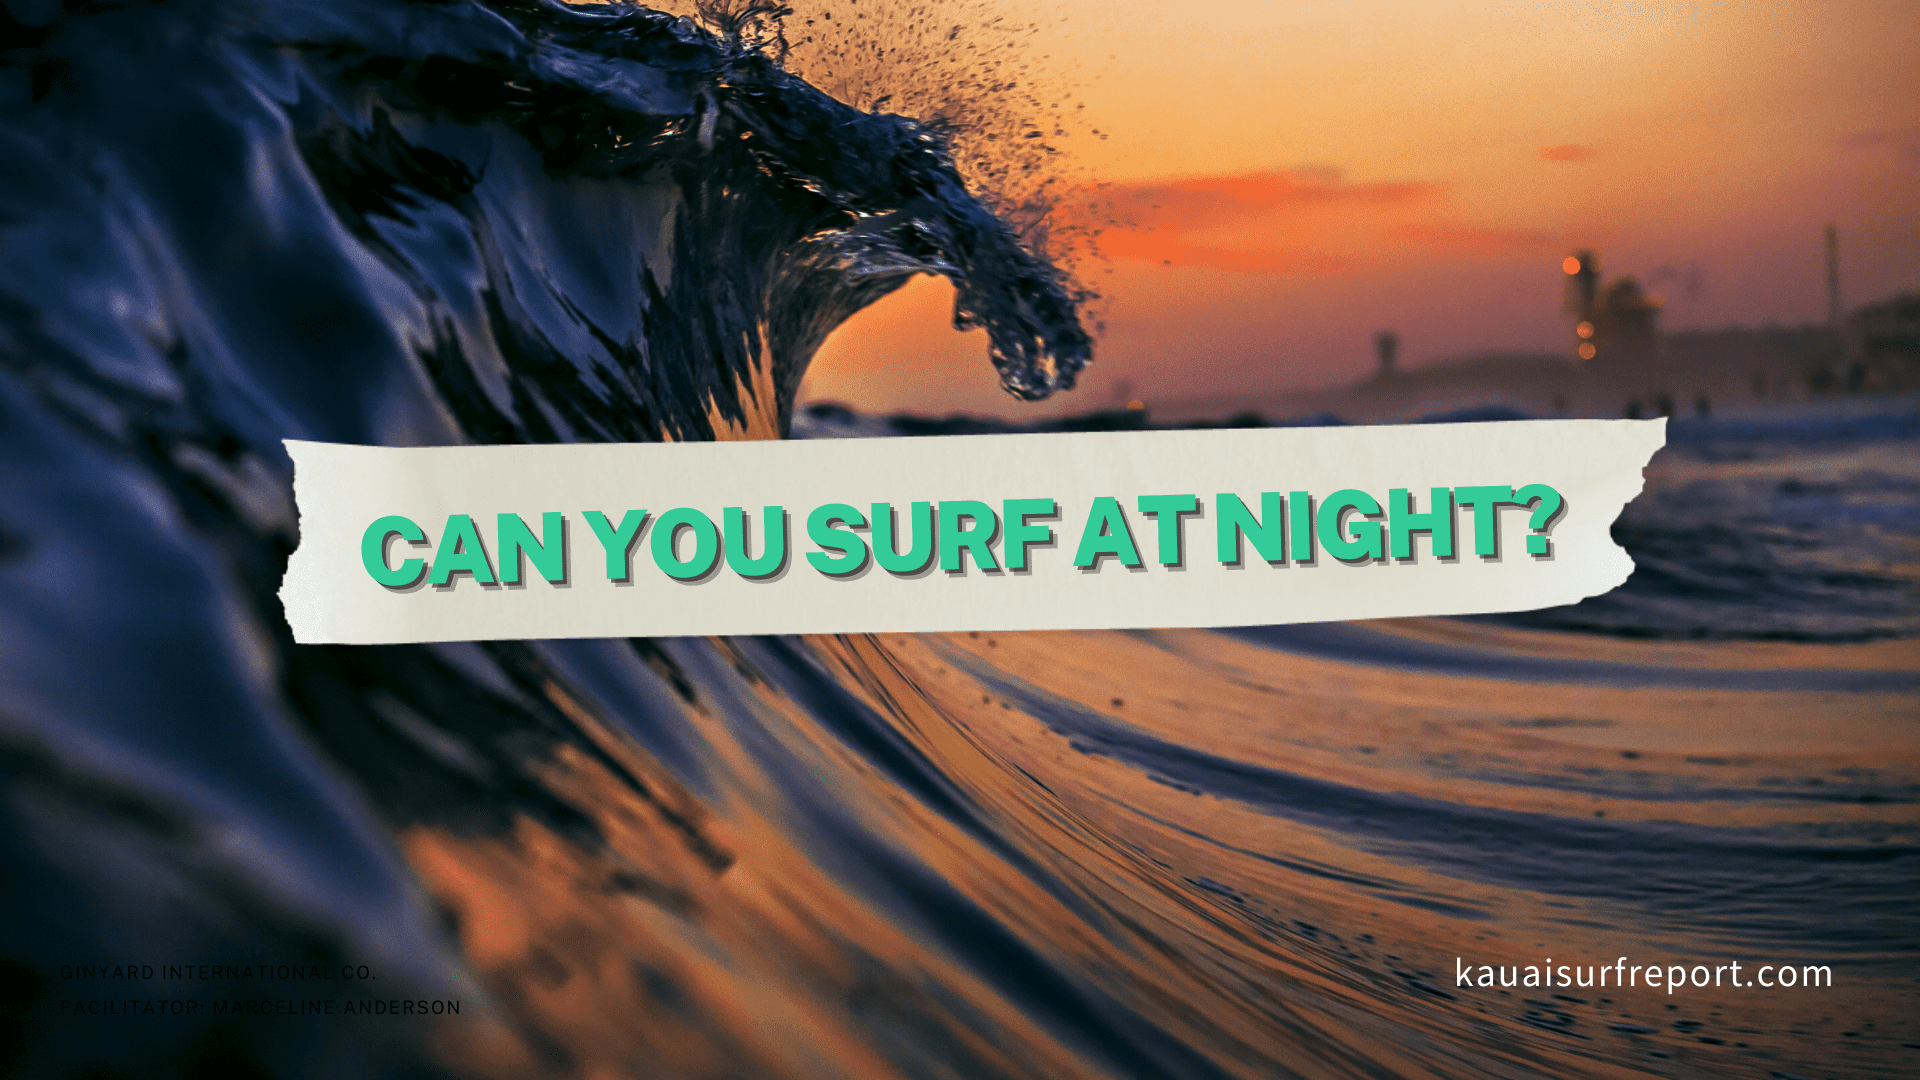 Can you surf at night? Yes, it’s amazing (but make it safe)